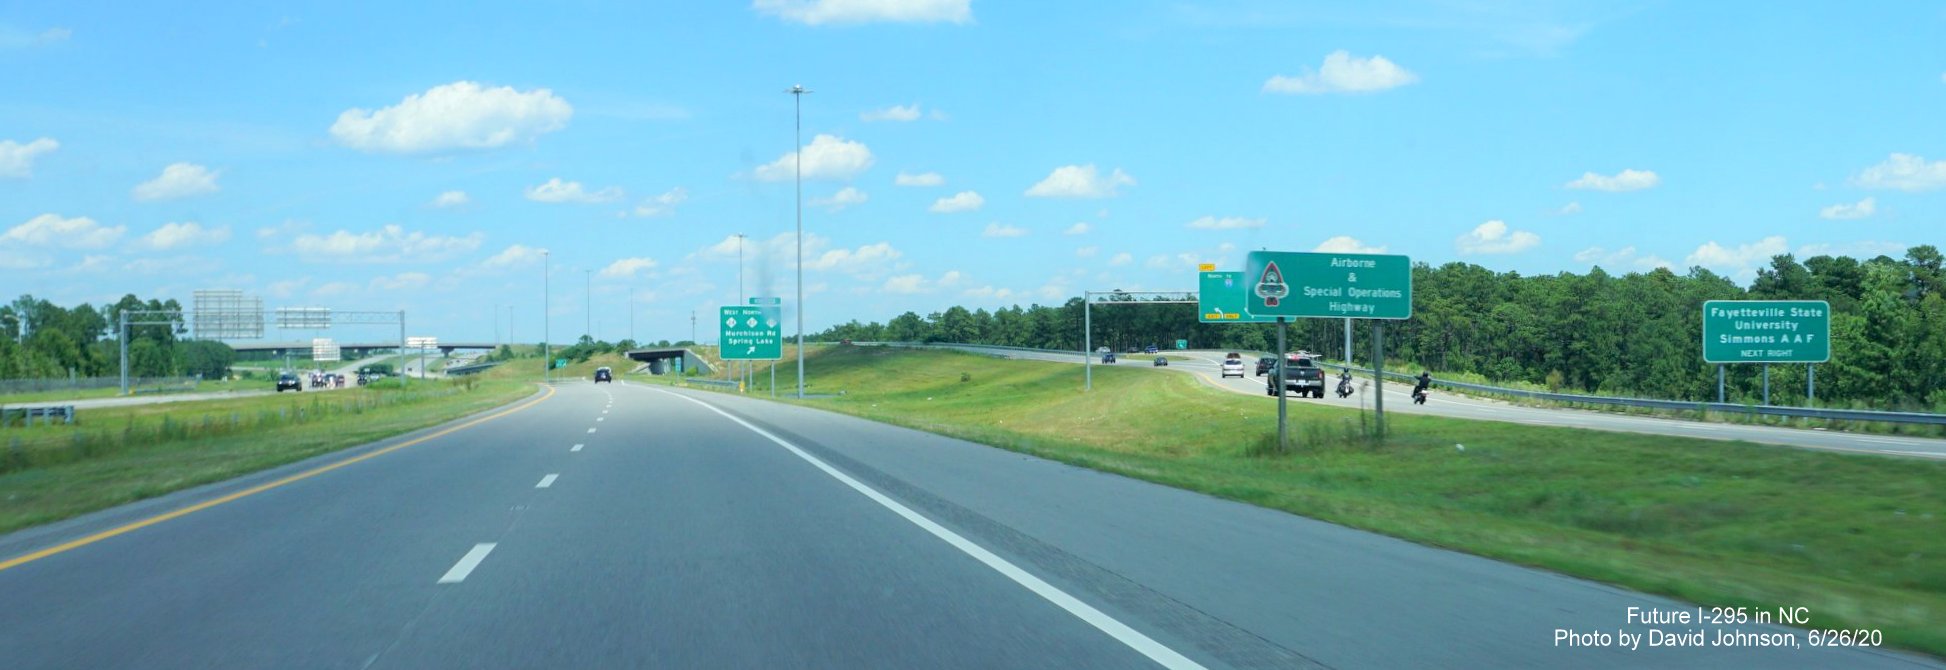 Image of signage along I-295 North referring it to the Airborne and Special Operations Highway, by David Johnson June 2020